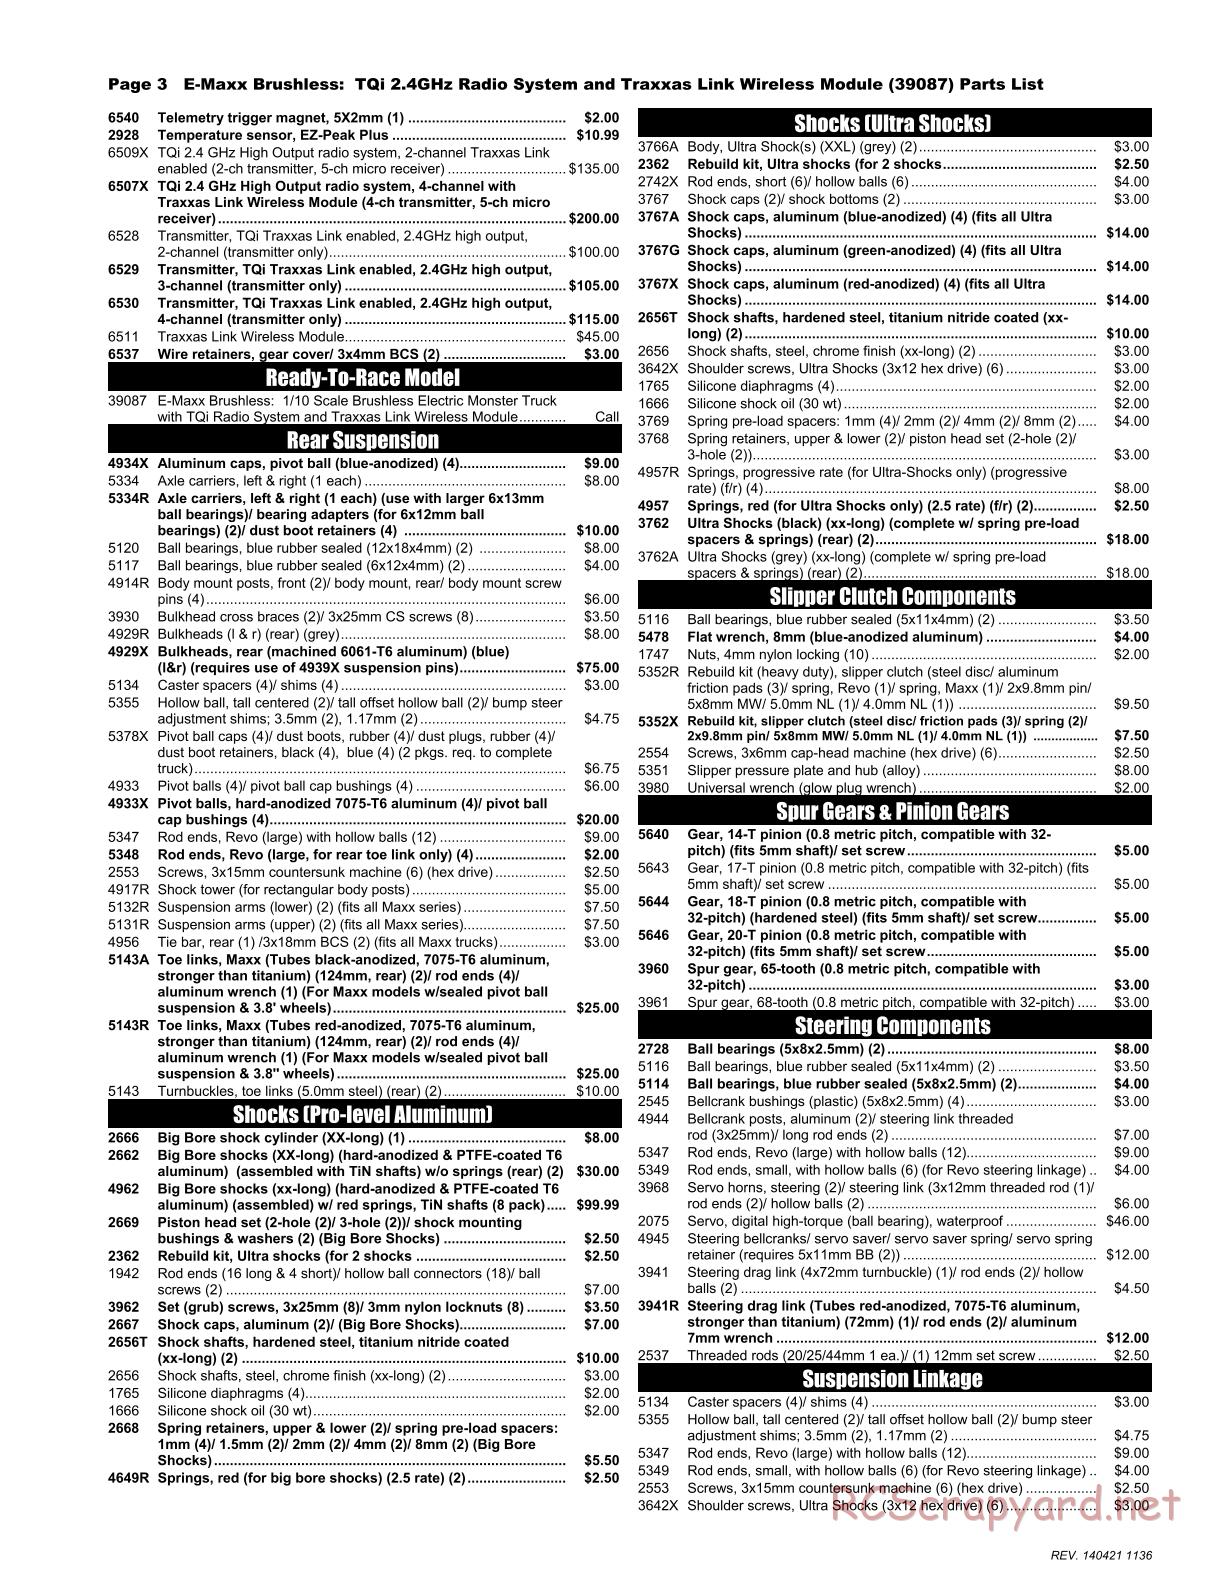 Traxxas - E-Maxx Brushless (2014) - Parts List - Page 3